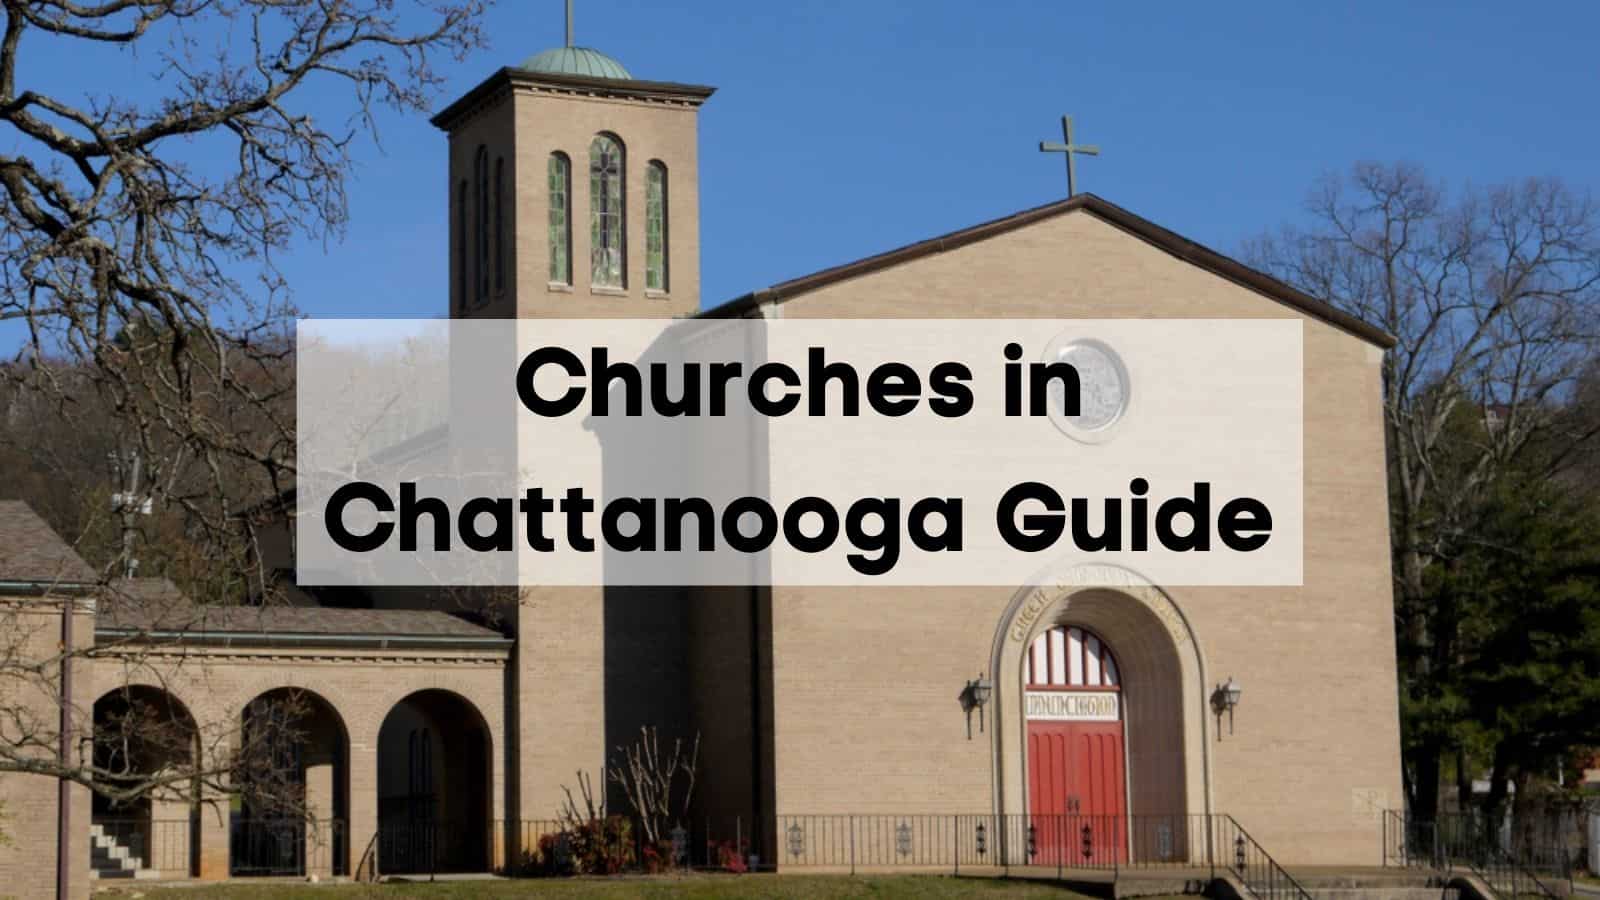 Churches in Chattanooga Guide